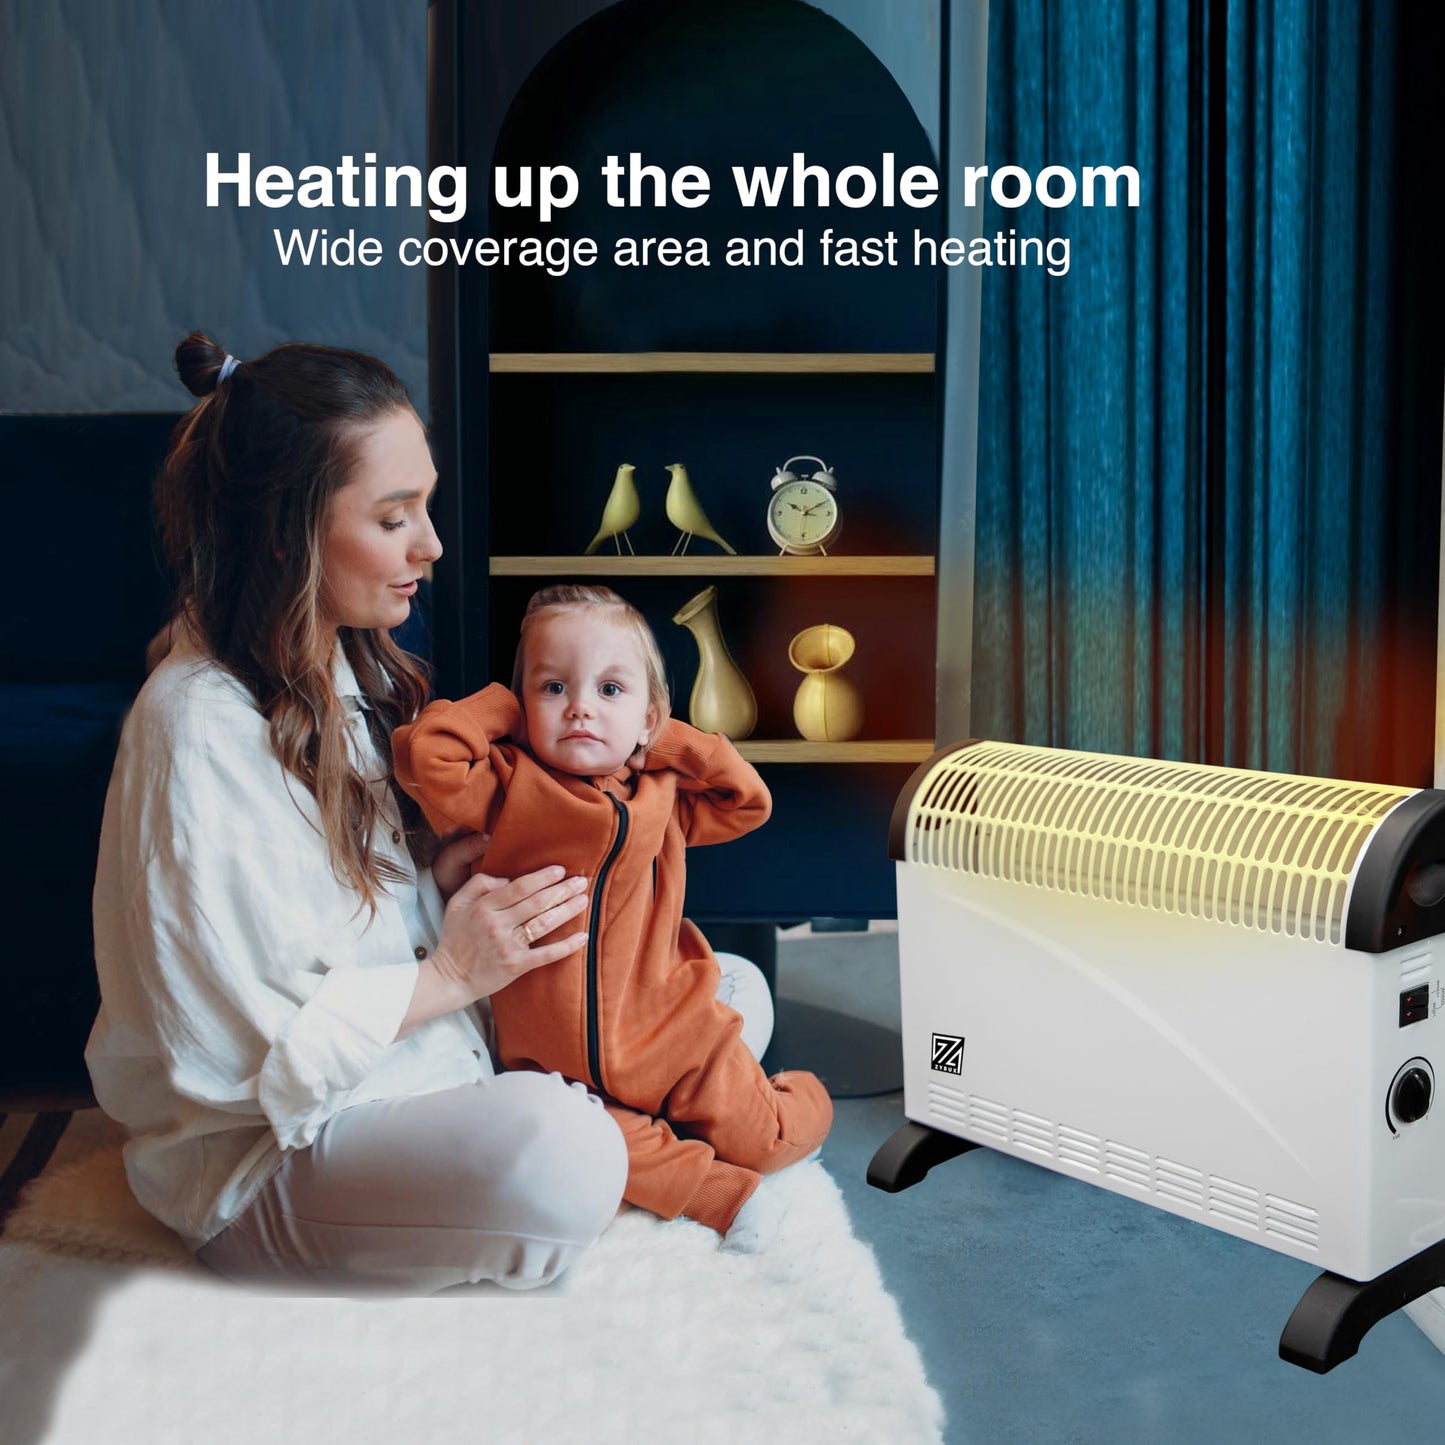 ZYBUX - 2000W Convection Heater, Electric Convector Radiator Heater - 3 Heat Settings (750/1250/ 2000 W), Adjustable Thermostat & Overheat Protection - Free Standing, Ideal for Home or Office, White